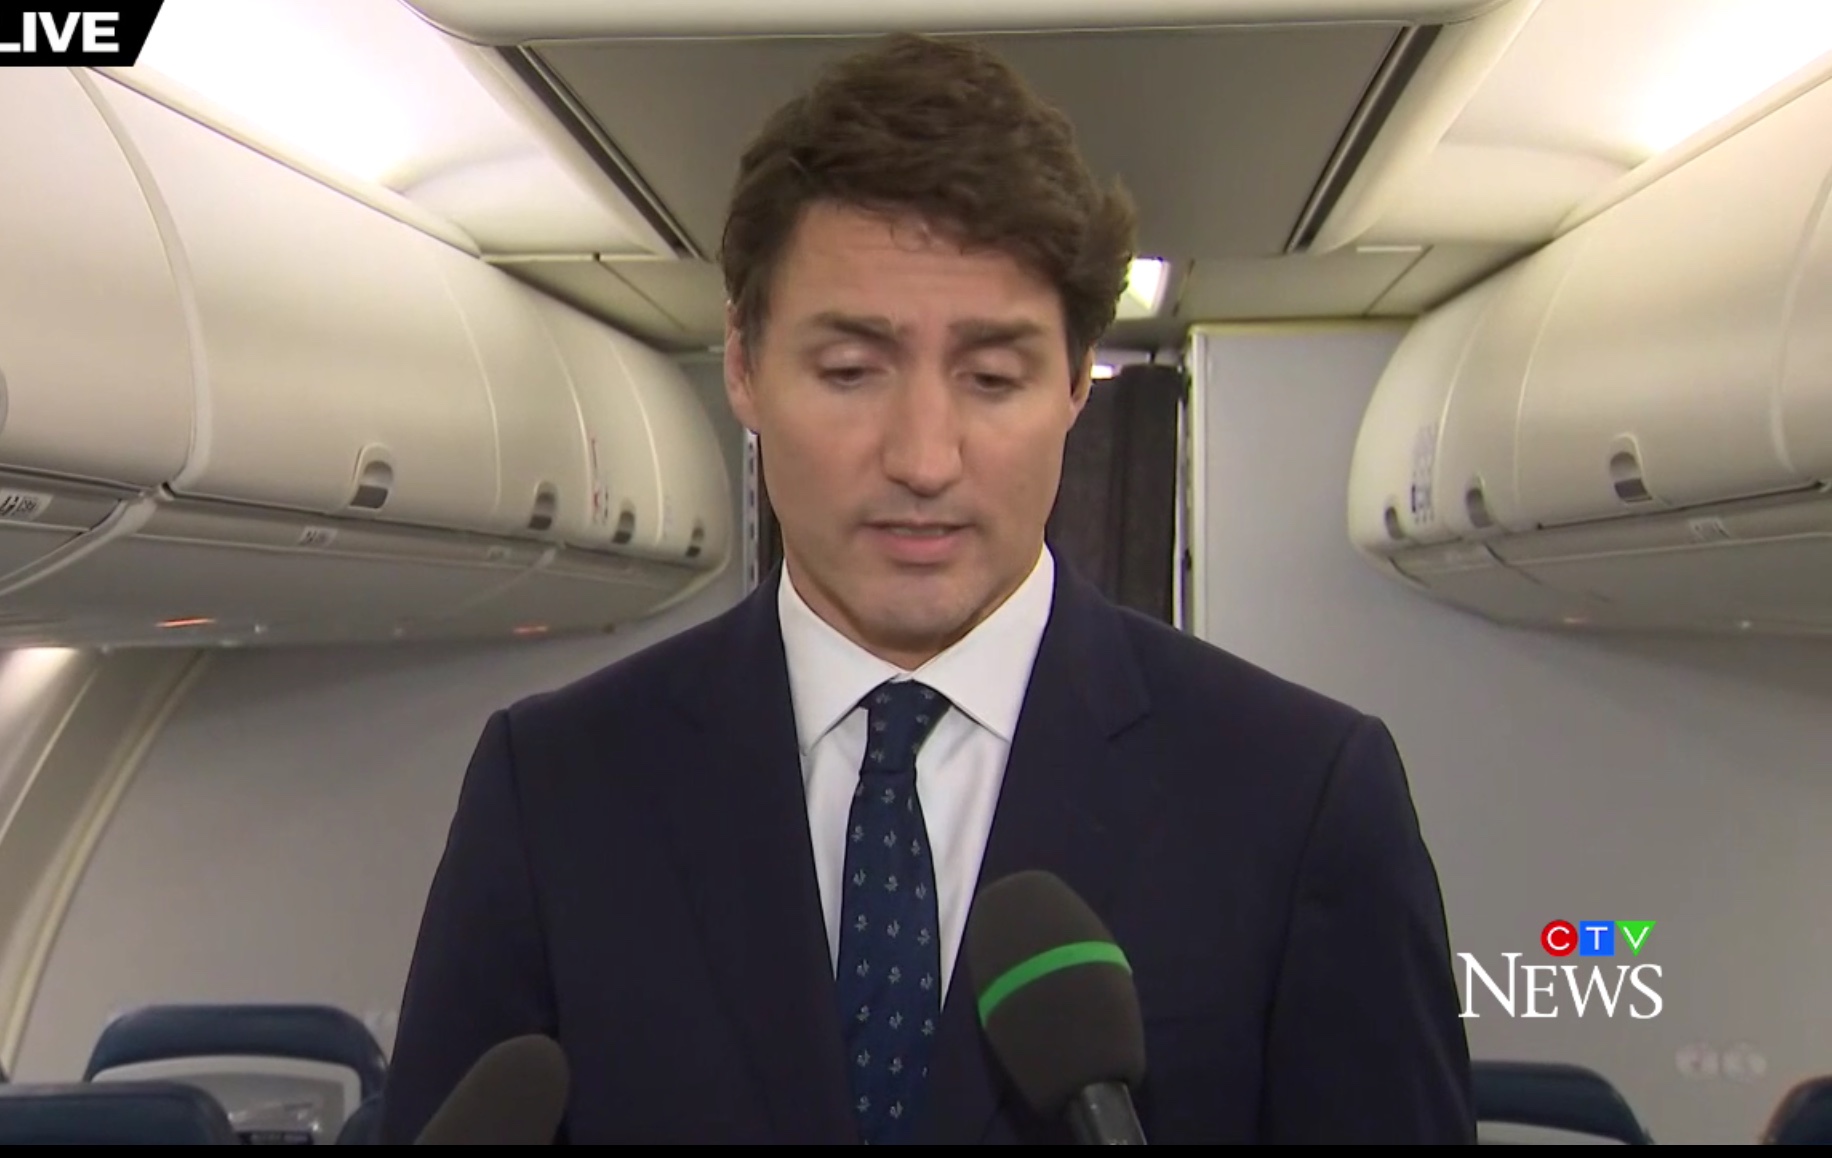 Canadian Prime Minister Justin Trudeau speaks to reporters from his election campaign aircraft. He apologized for wearing brownface, Sept. 18, 2019. CTV News screenshot.